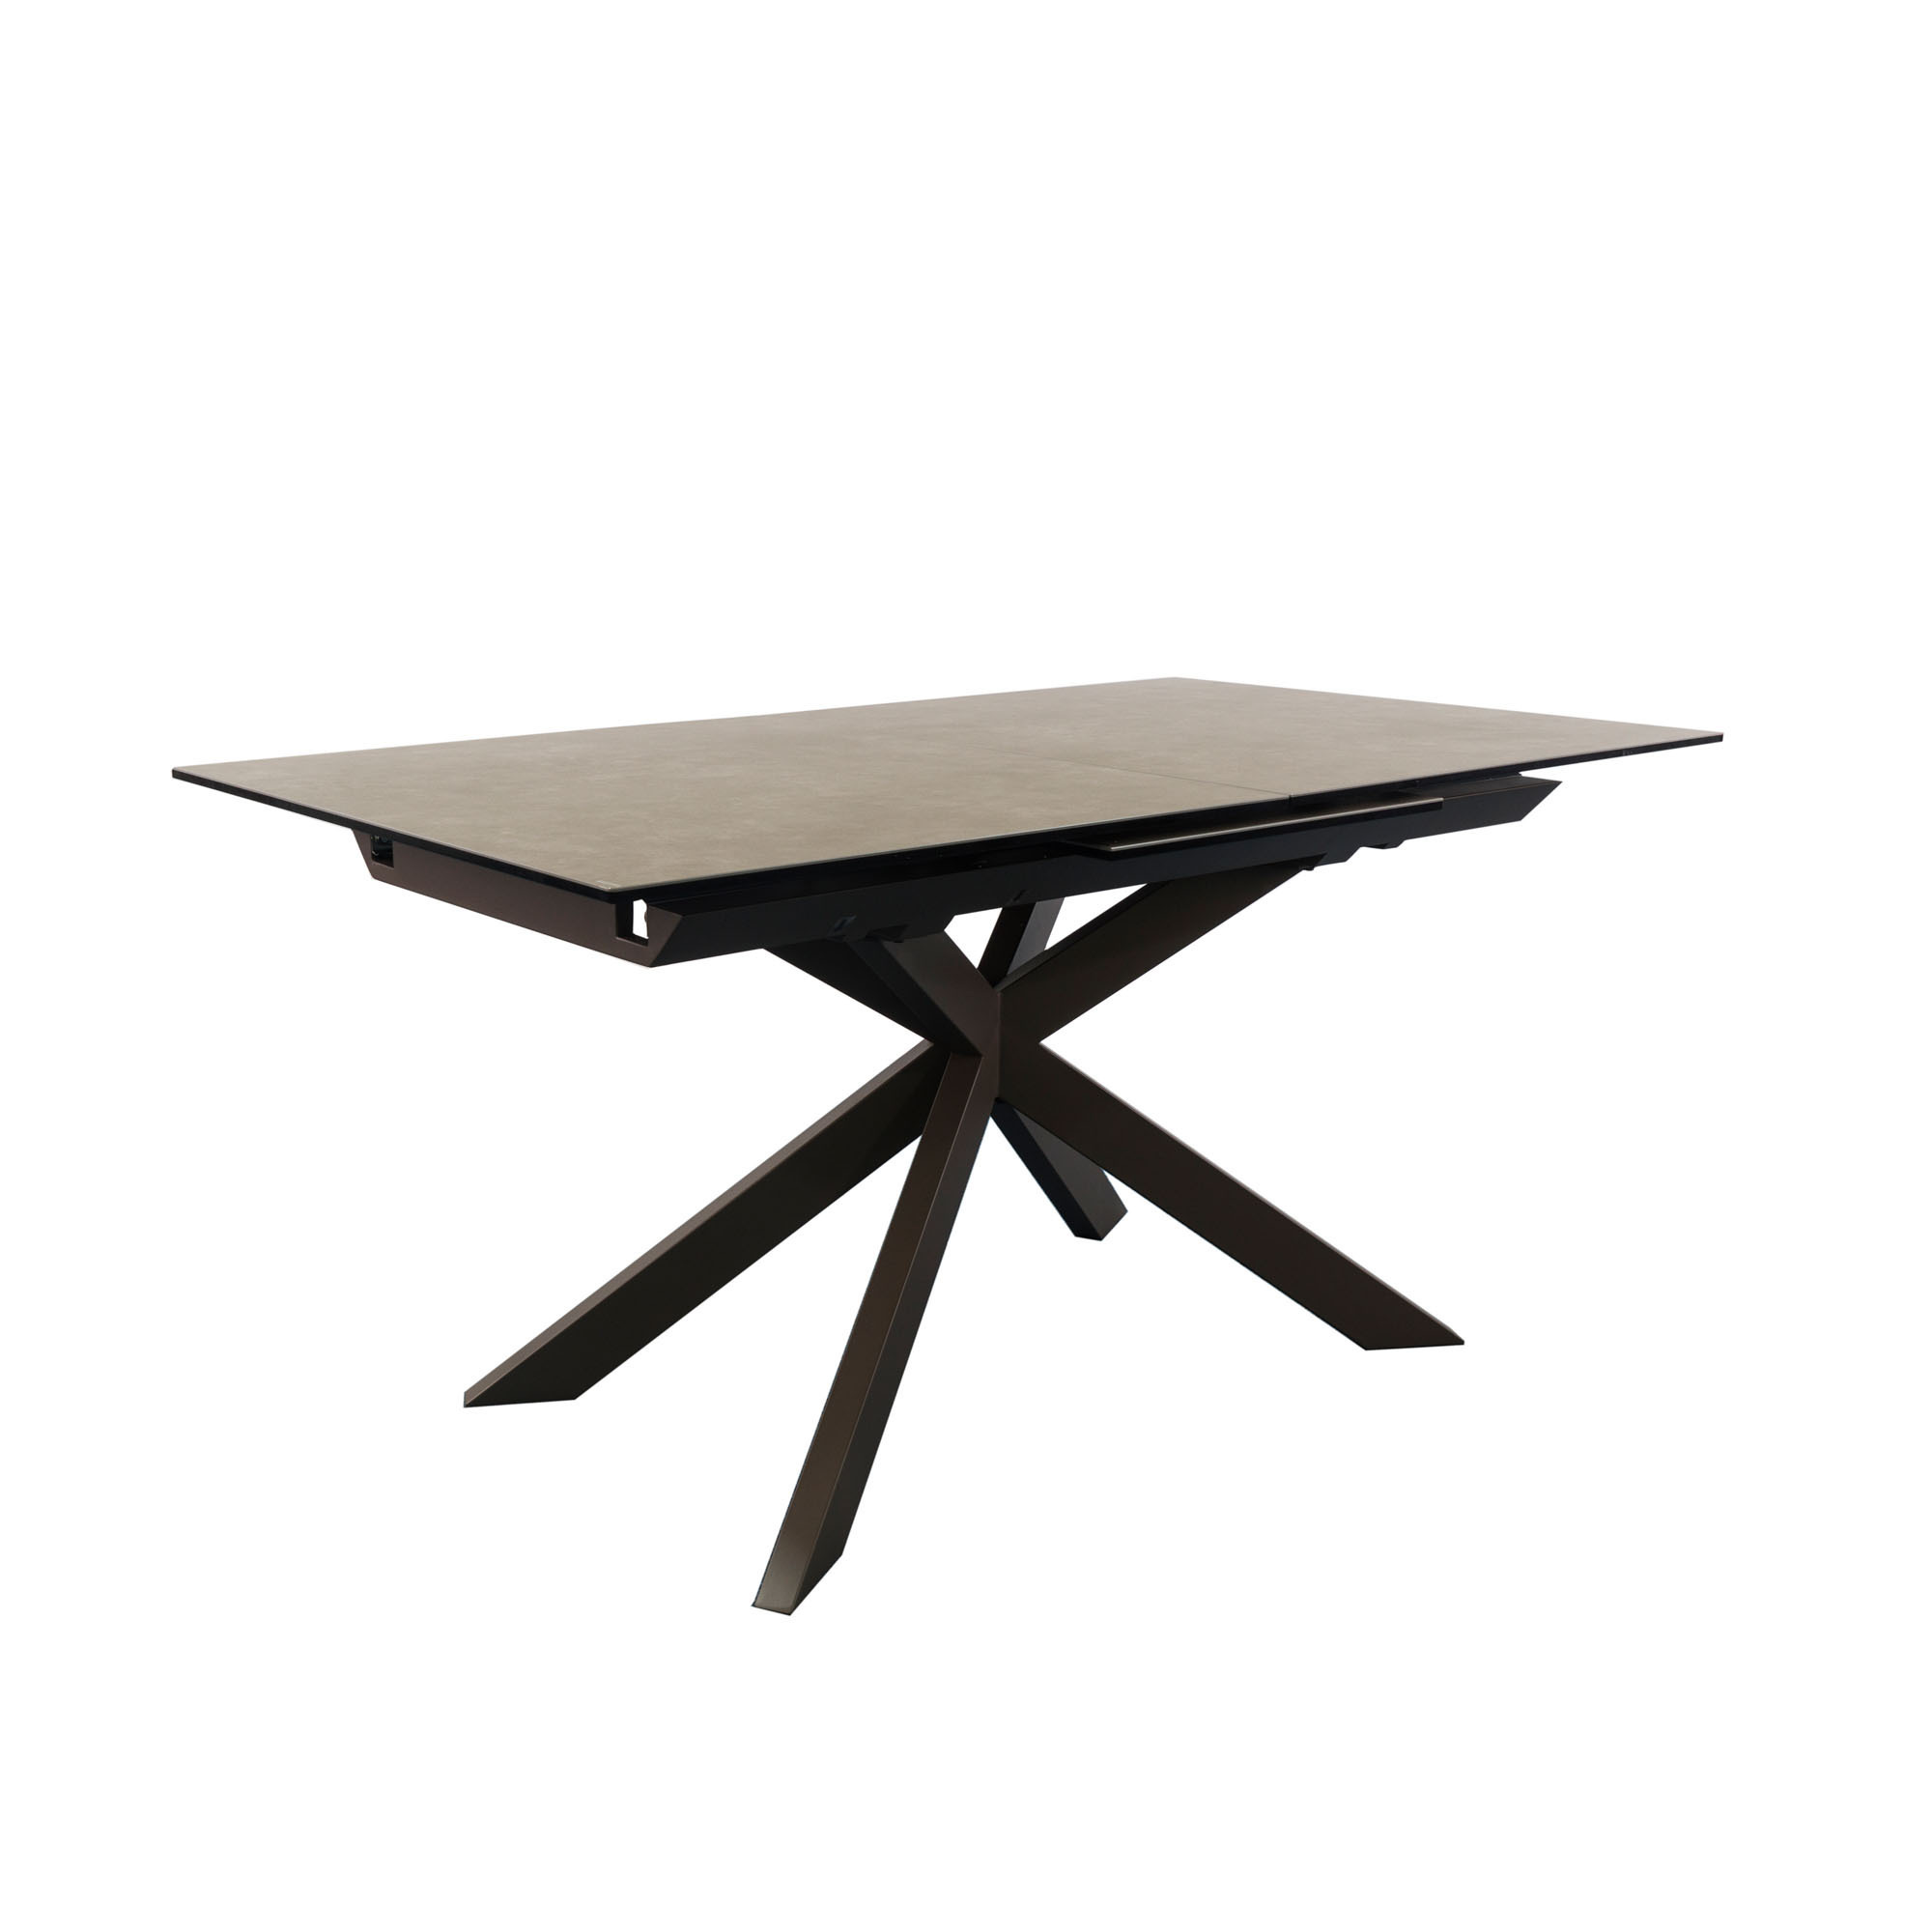 Atminda extendable table, porcelain and steel legs with a brown finish, 160 (210) x 90 cm